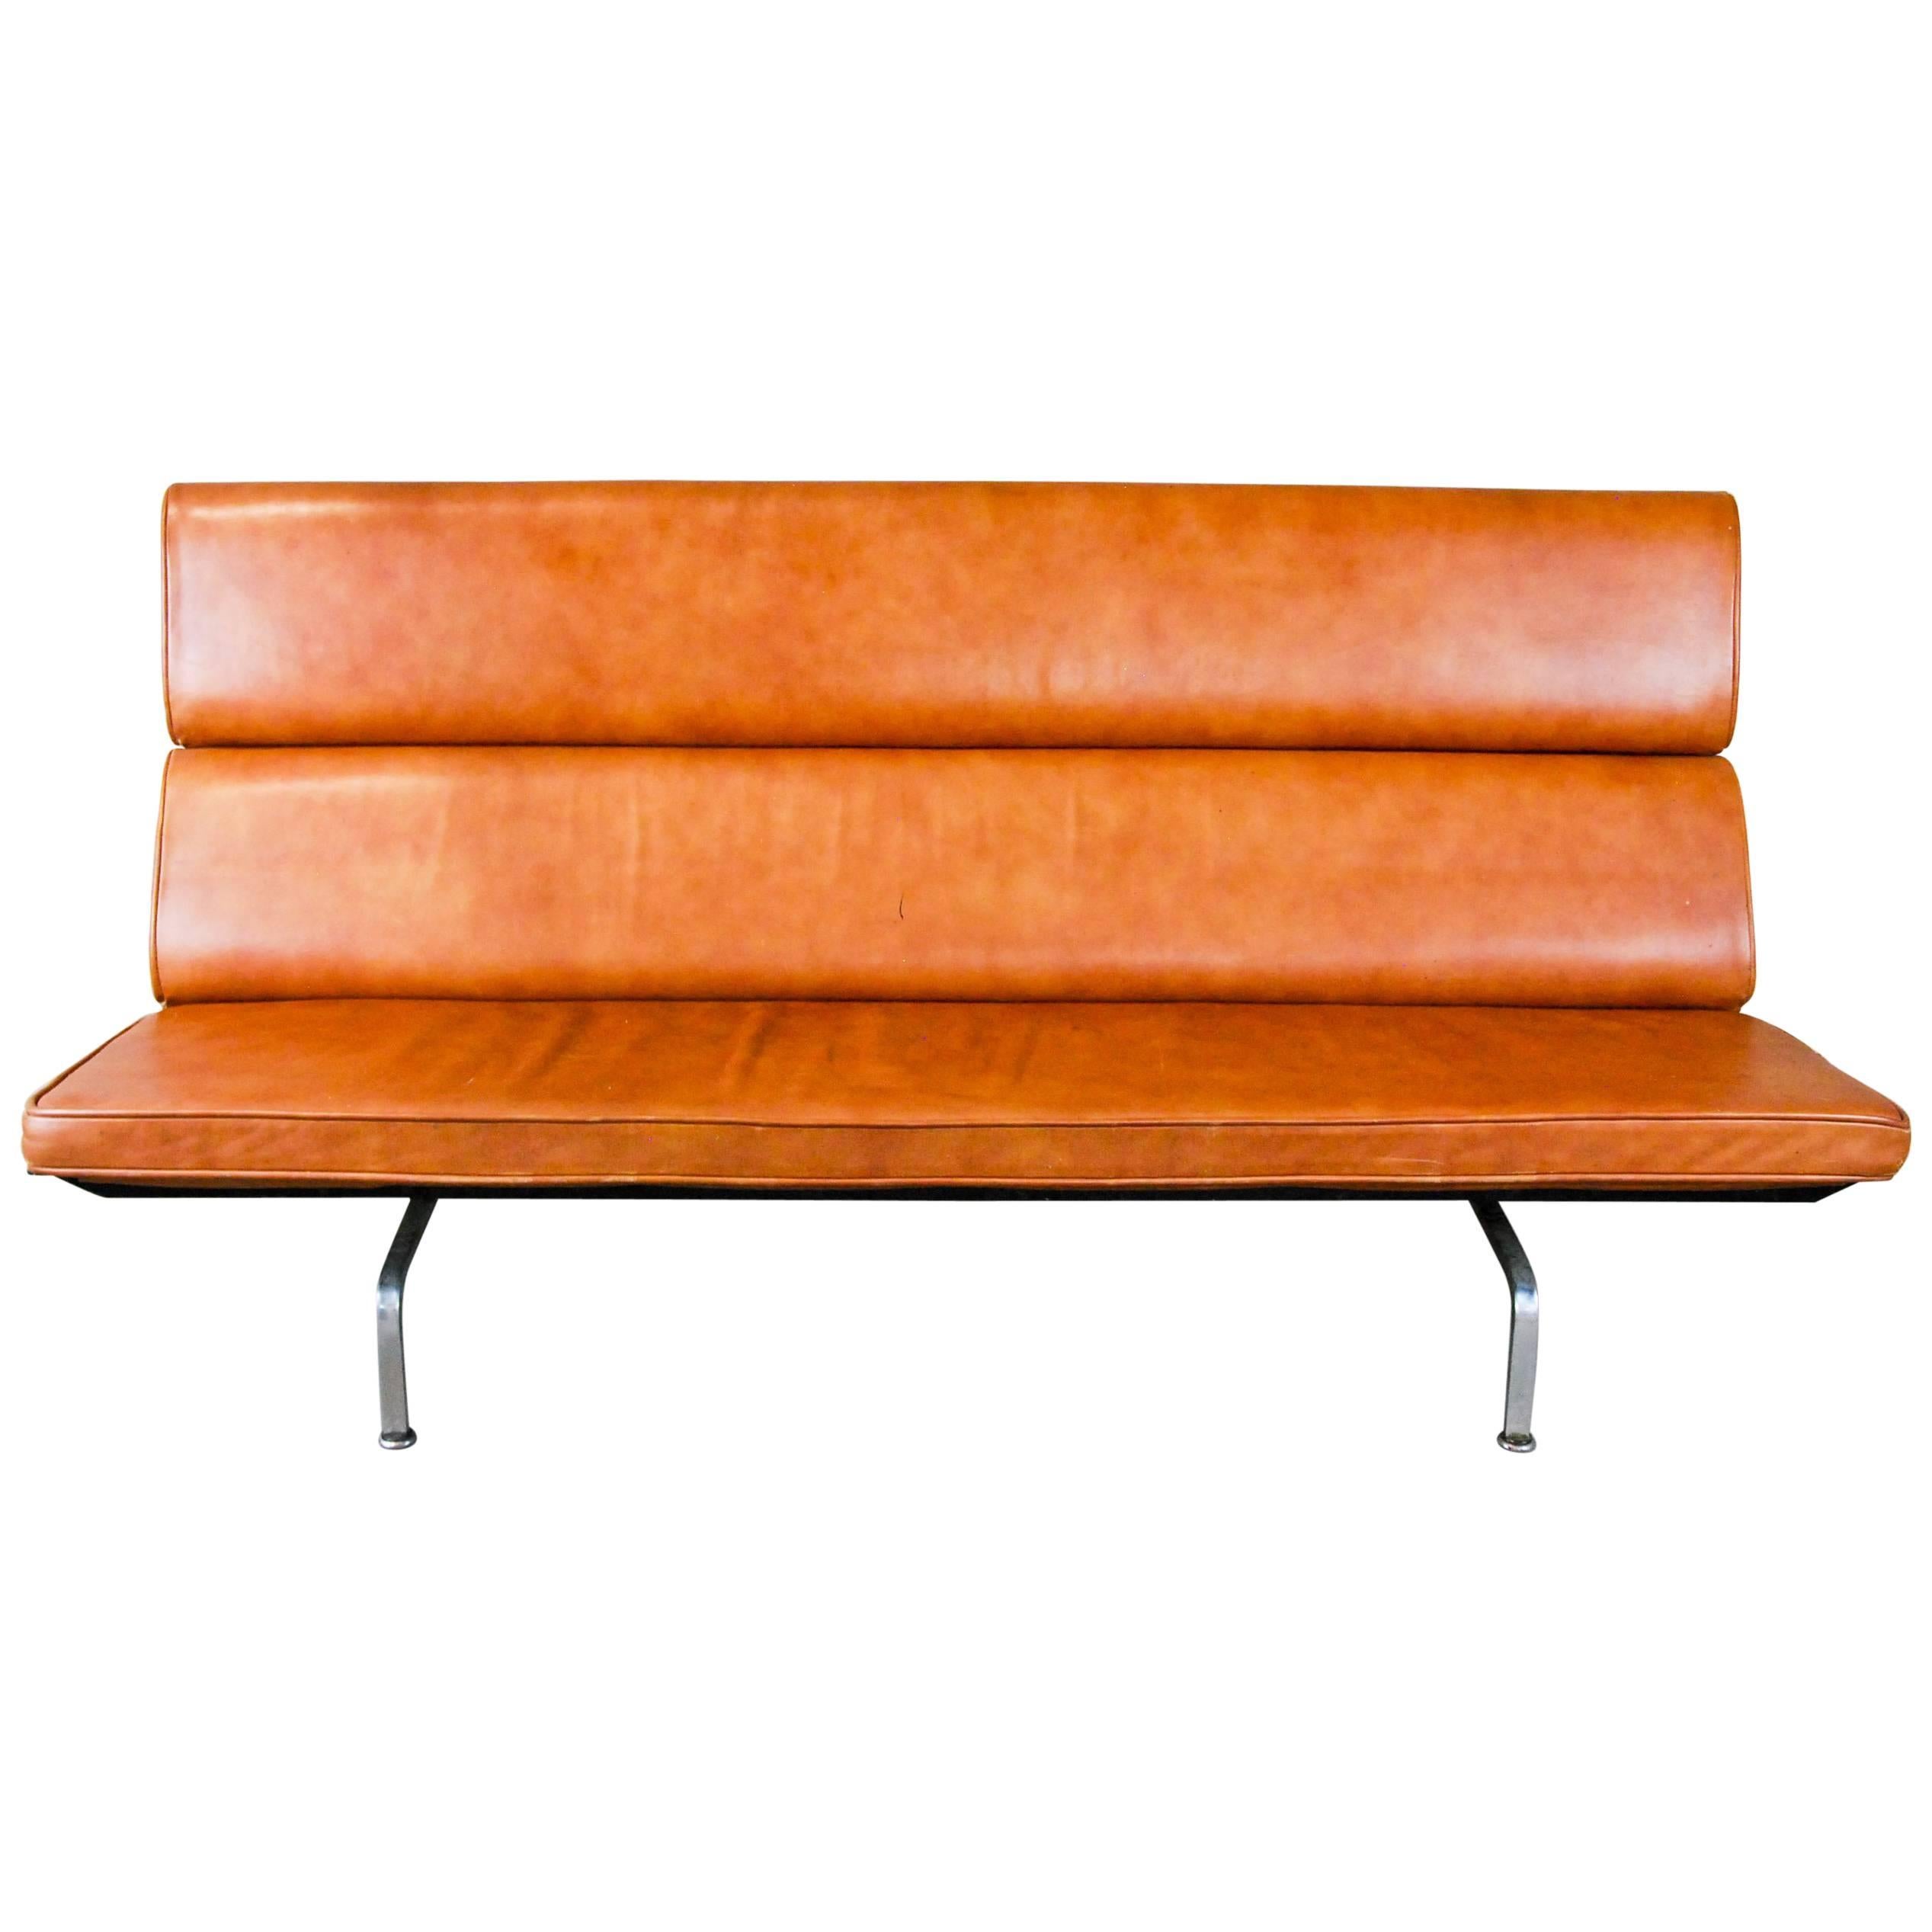 1958 Charles and Ray Eames Designed Fold-Down Compact Sofa for Herman Miller